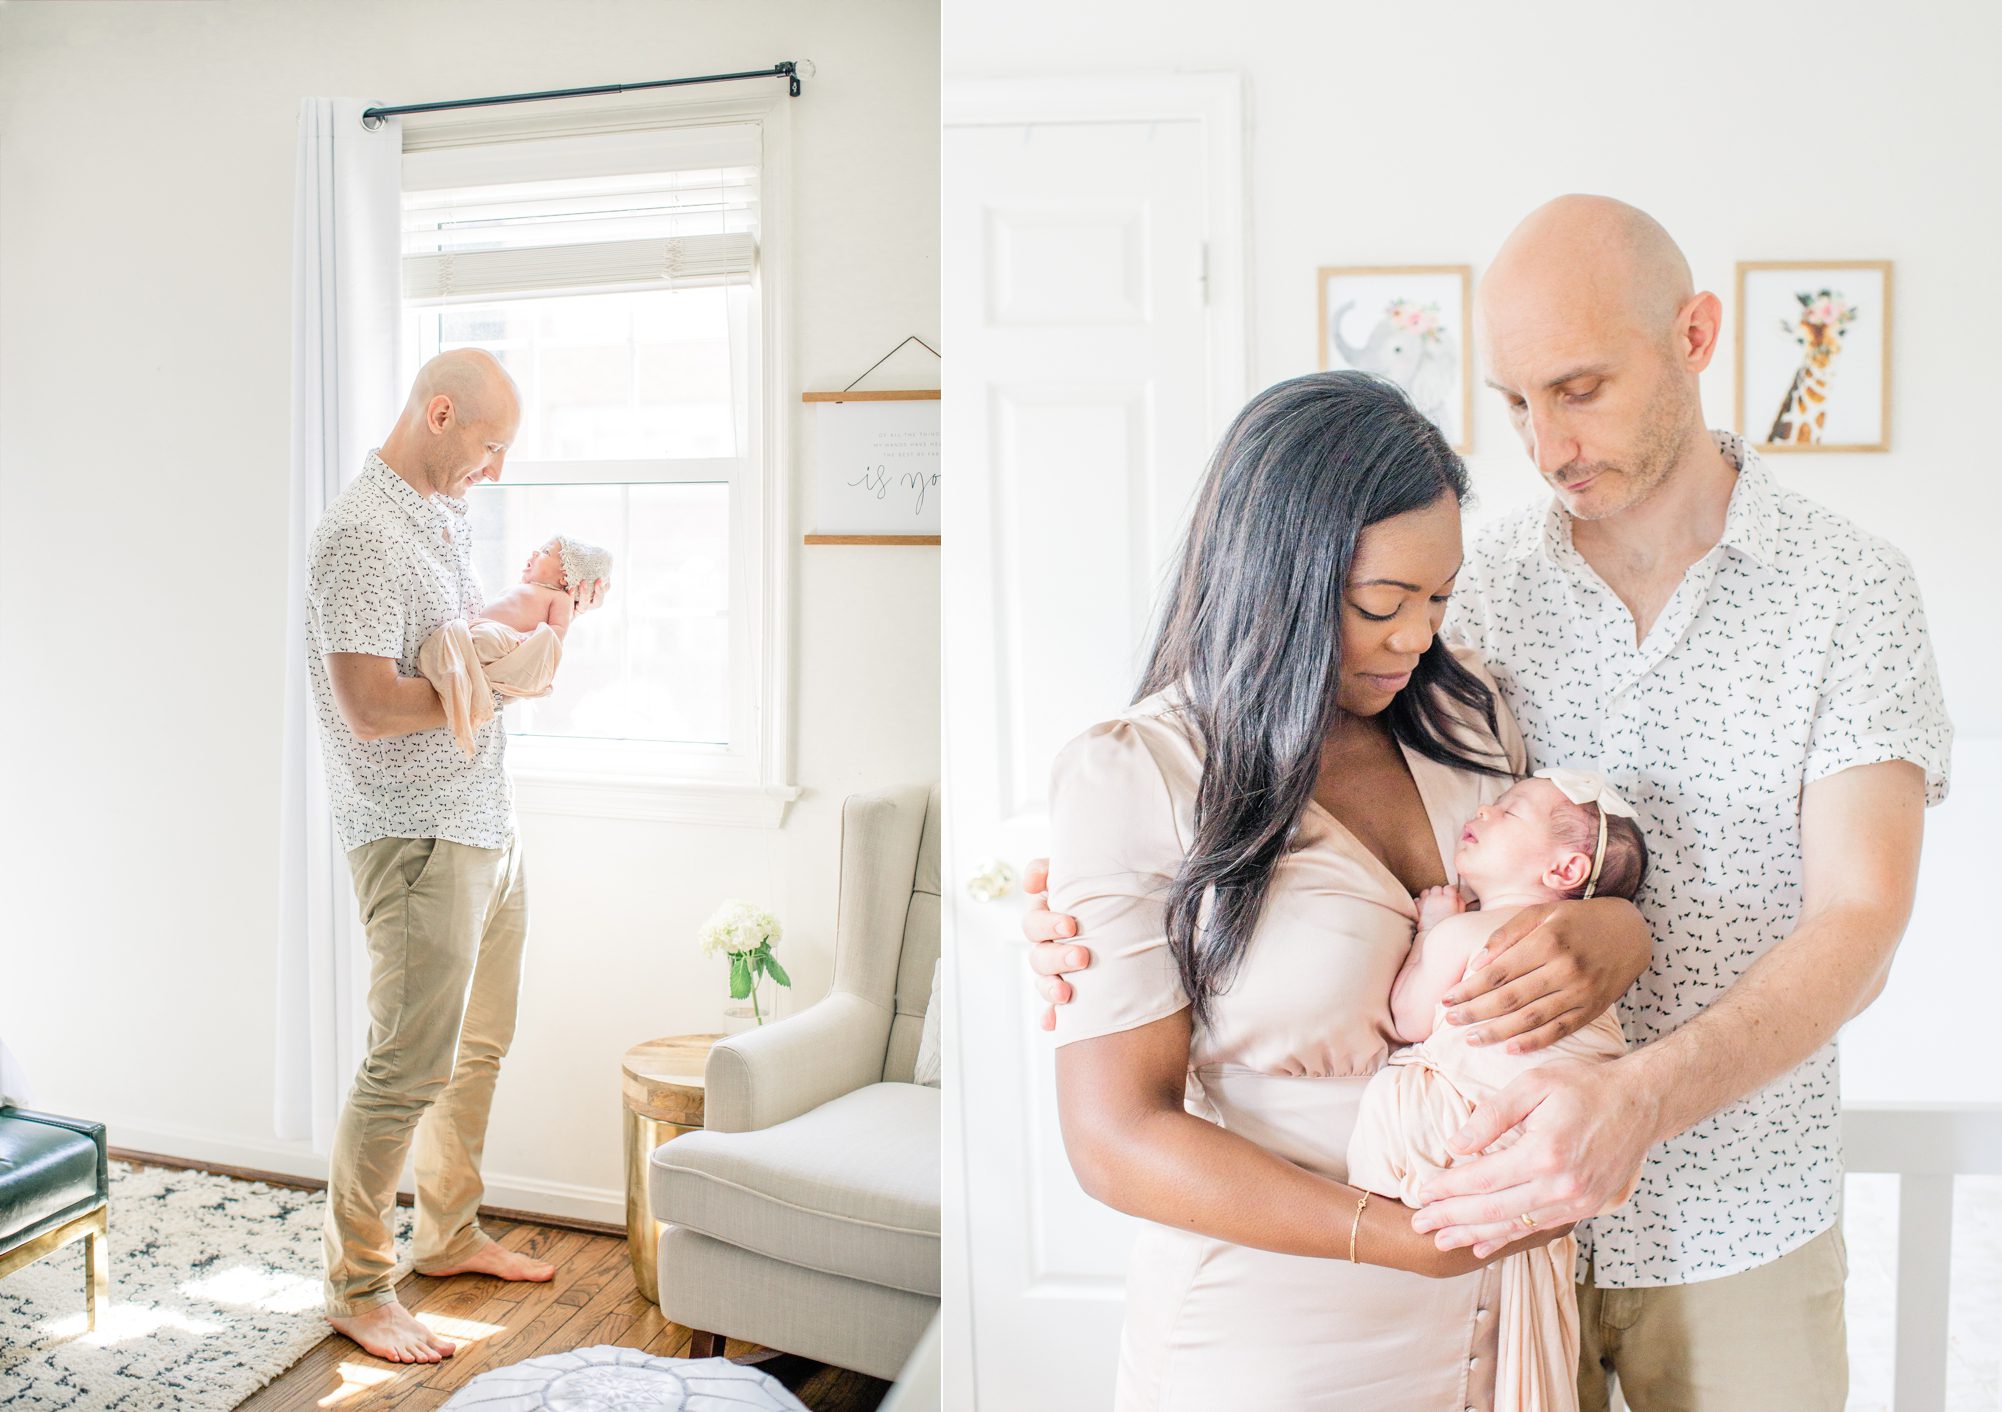 Dad holding baby by window light in left image, parents holding her together in right image during newborn session. Photos by LRG Portraits.